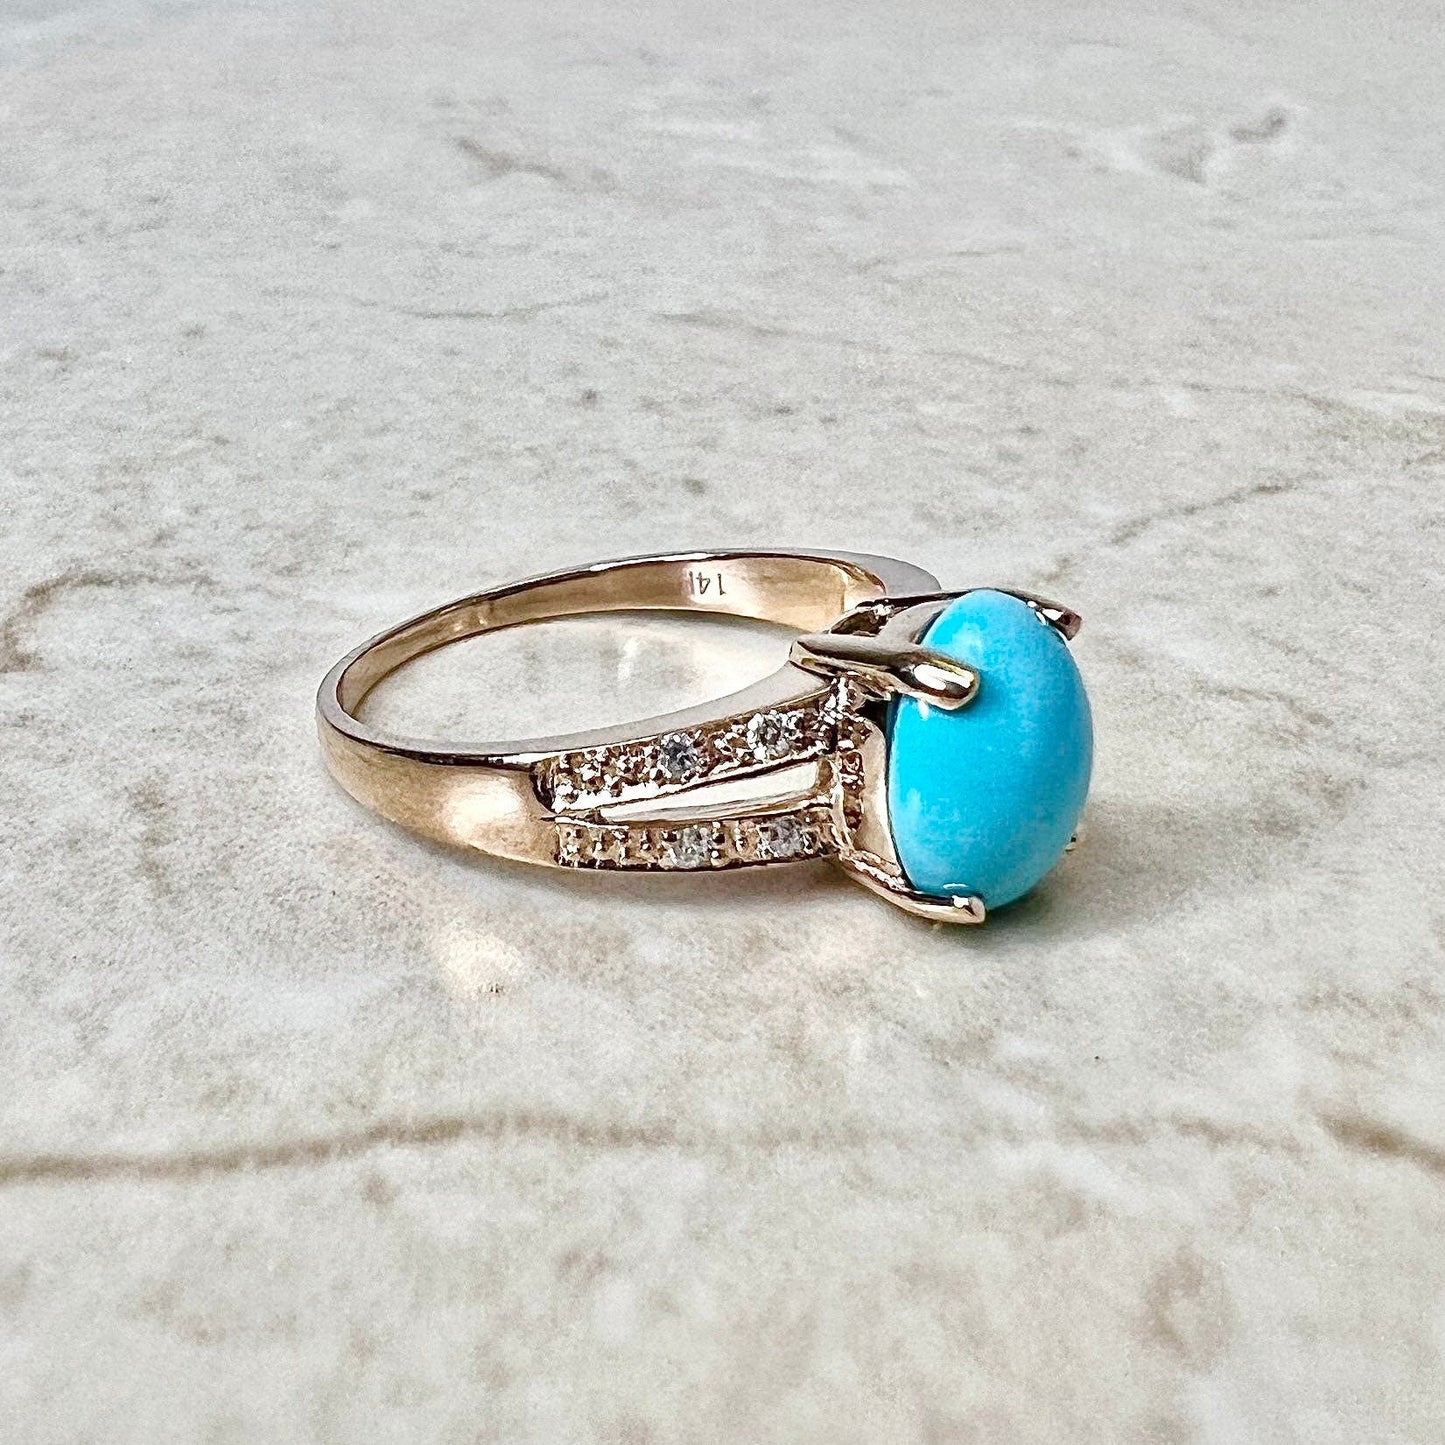 14K Gold Turquoise & Diamond Cocktail Ring - Rose Gold Turquoise Ring - Solitaire Ring - December Birthstone - Birthday Gift For Her